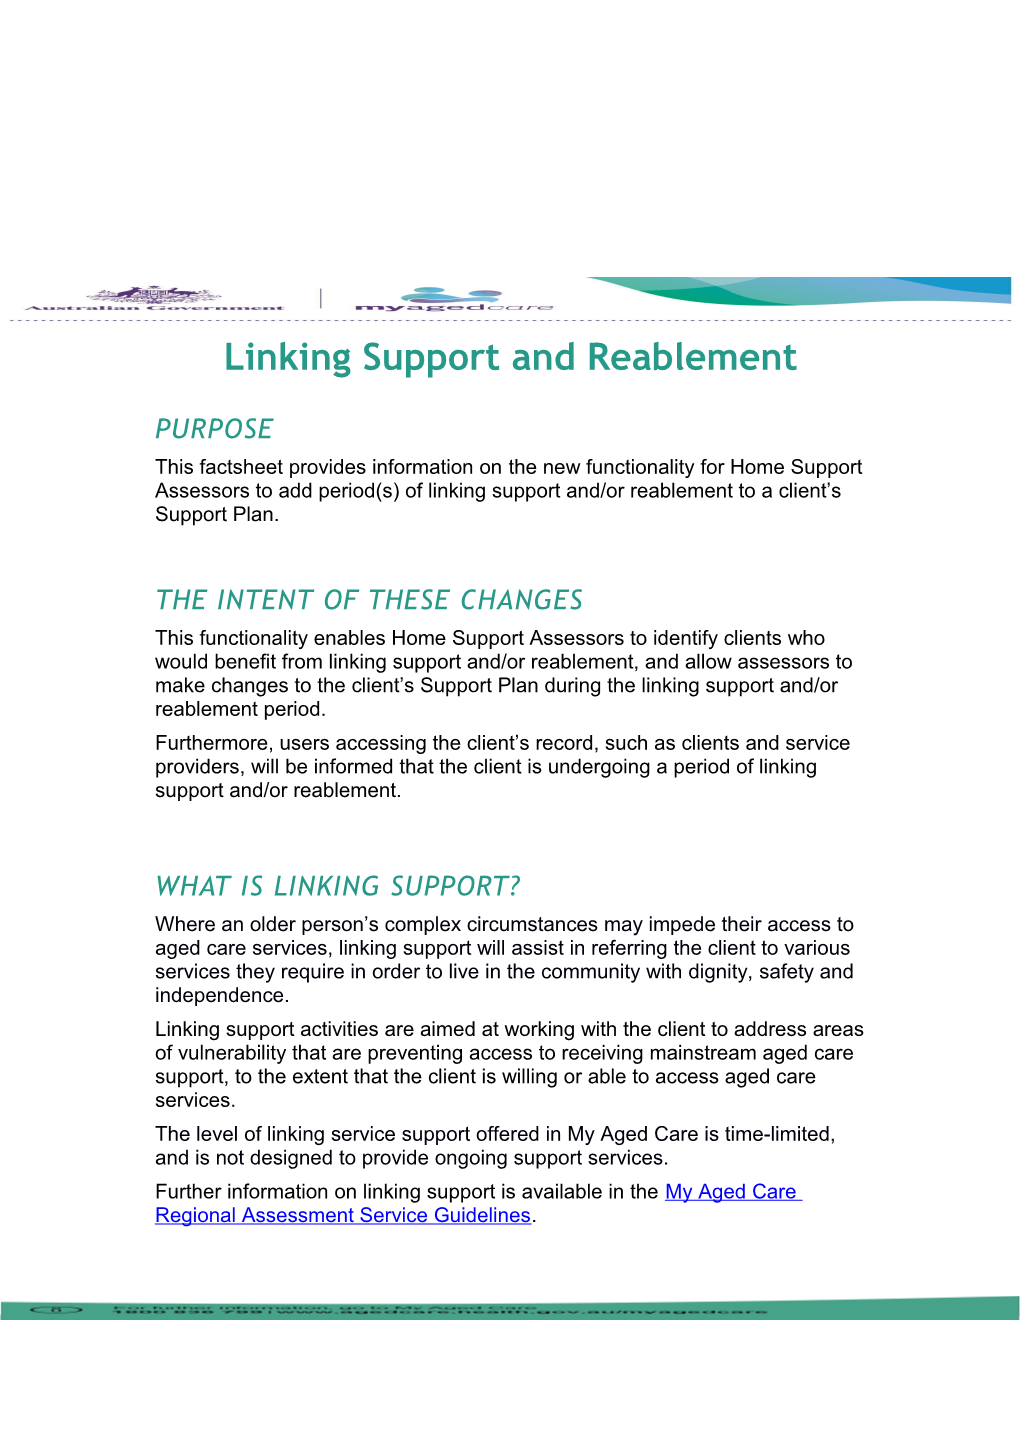 Linking Support and Reablement